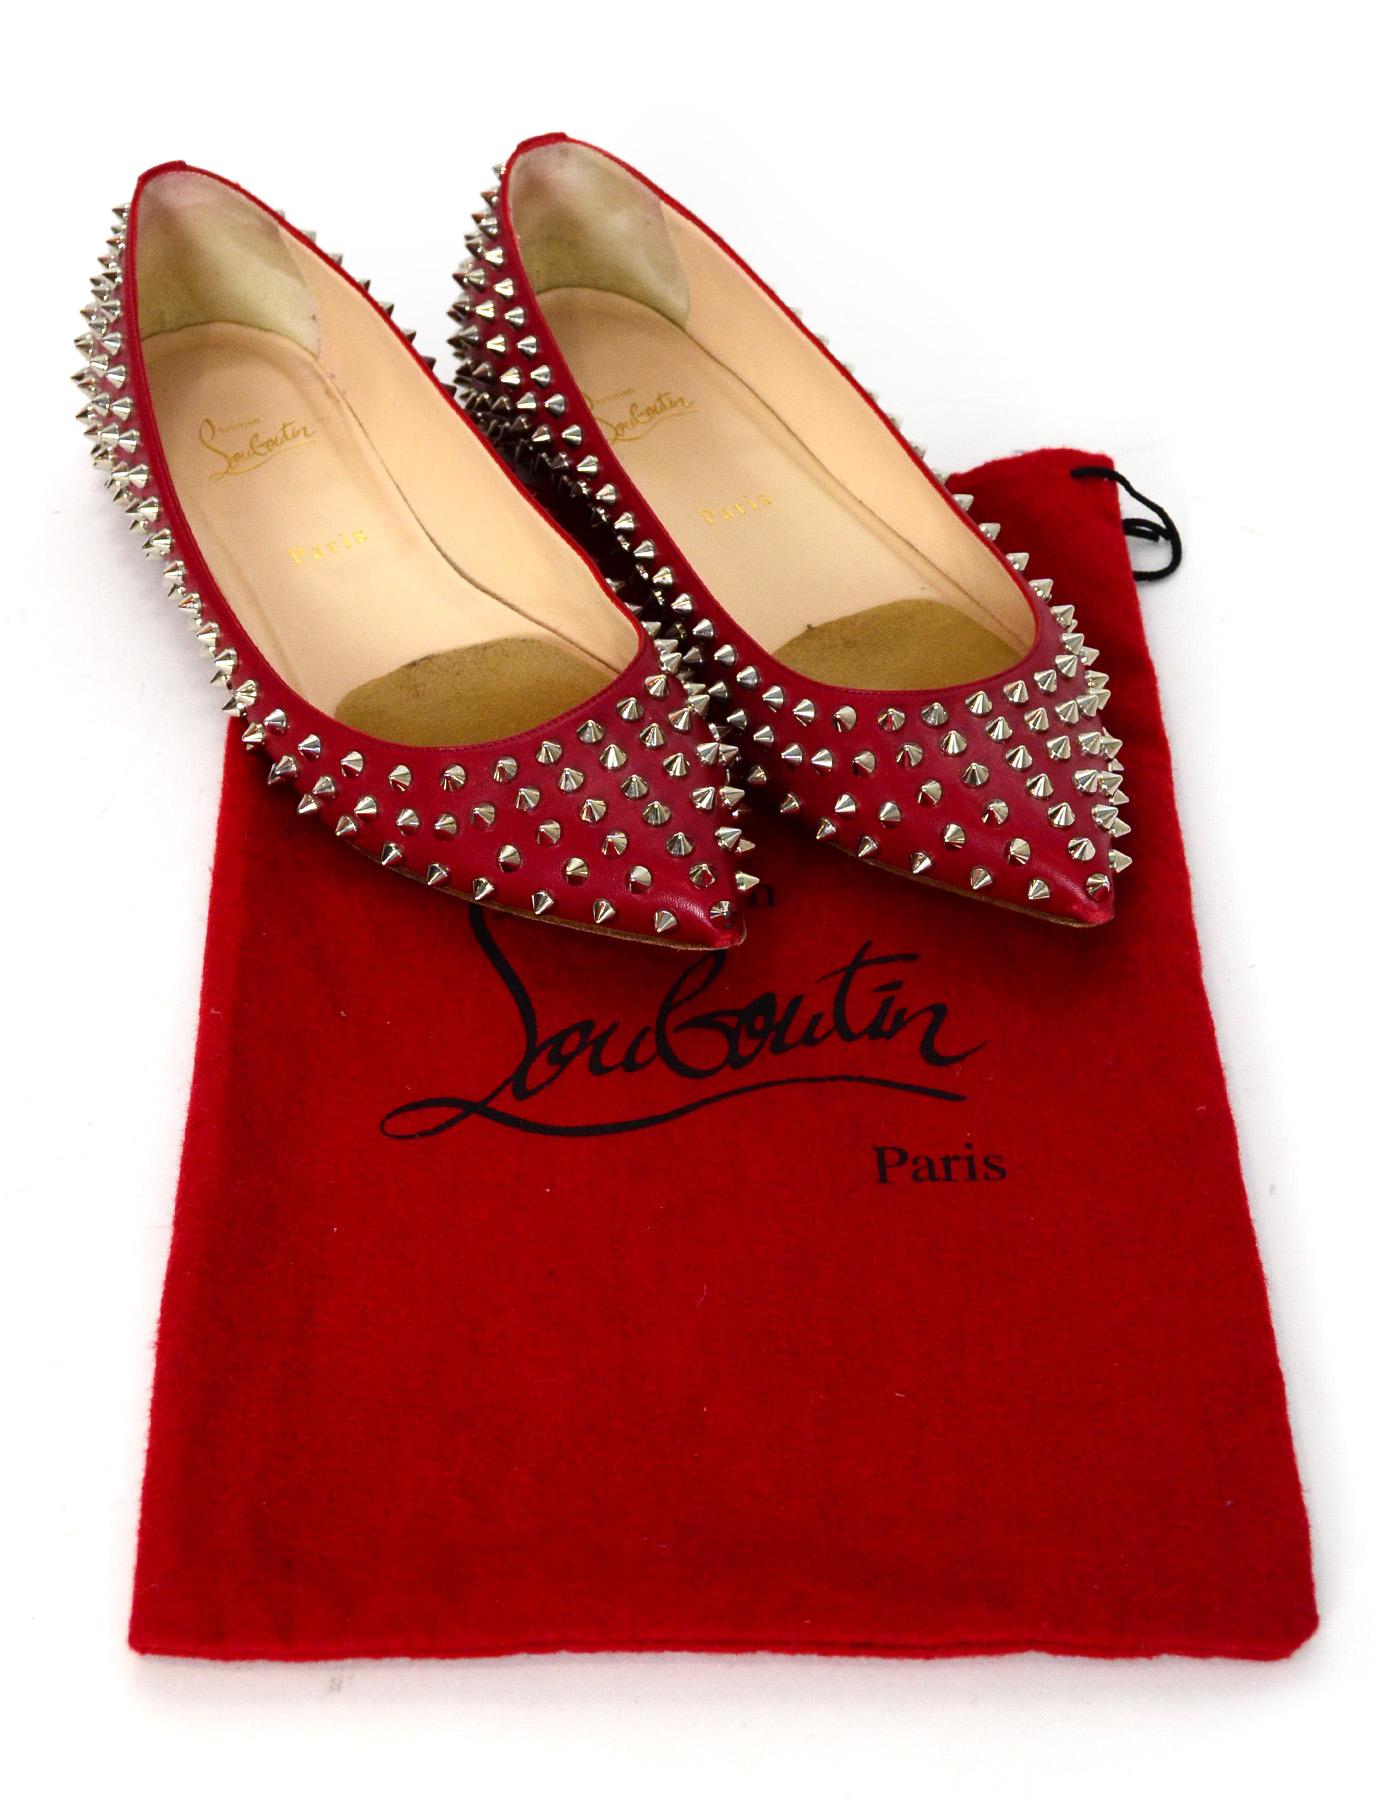 Christian Louboutin Red Leather Silver Spikes Pigalle Pointed Toe Flats Sz 41

Made In: Italy
Color: Red and silver
Hardware: Silvertone
Materials: Leather and metal 
Closure/Opening: Slide on
Overall Condition: Very good pre-owned condition with